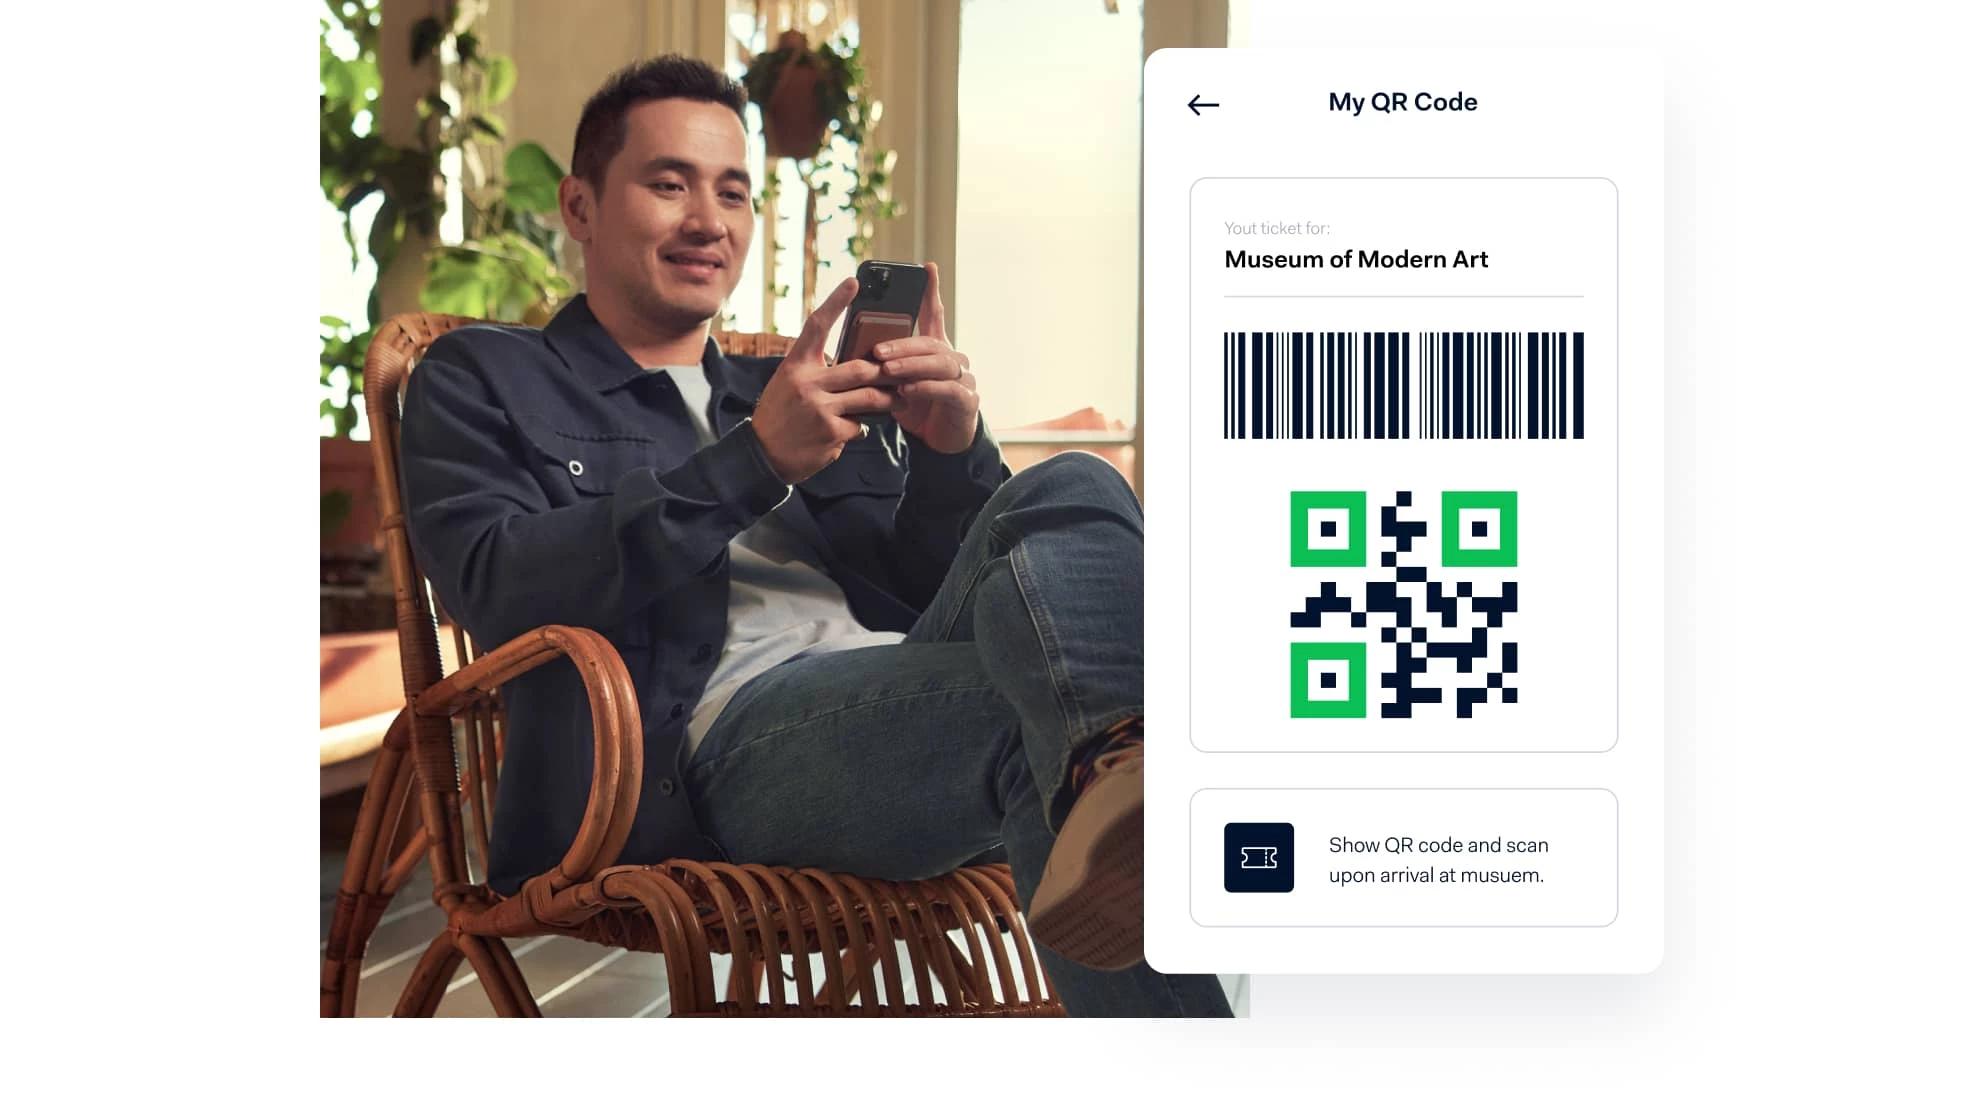 A phone screen showing a QR payment